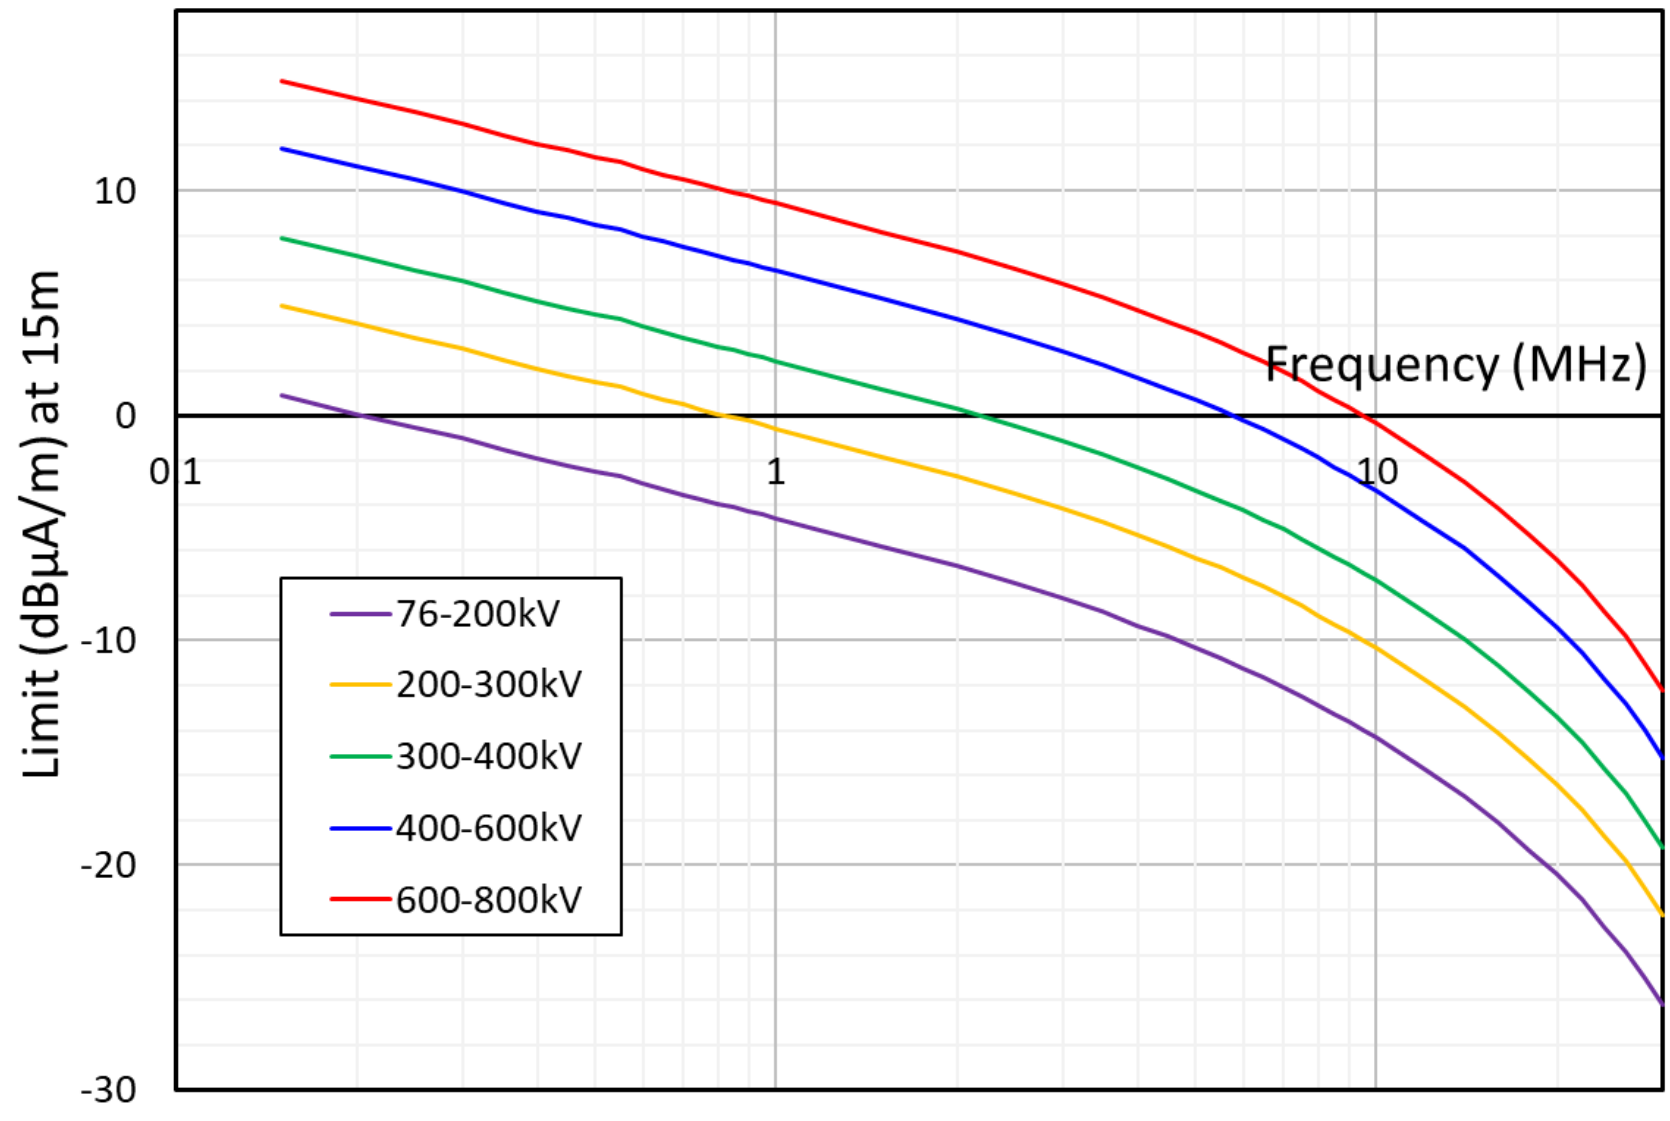 Figure 2: Magnetic field strength limits for transmission substations (at 15 m distance) (the long description is located below the             image)